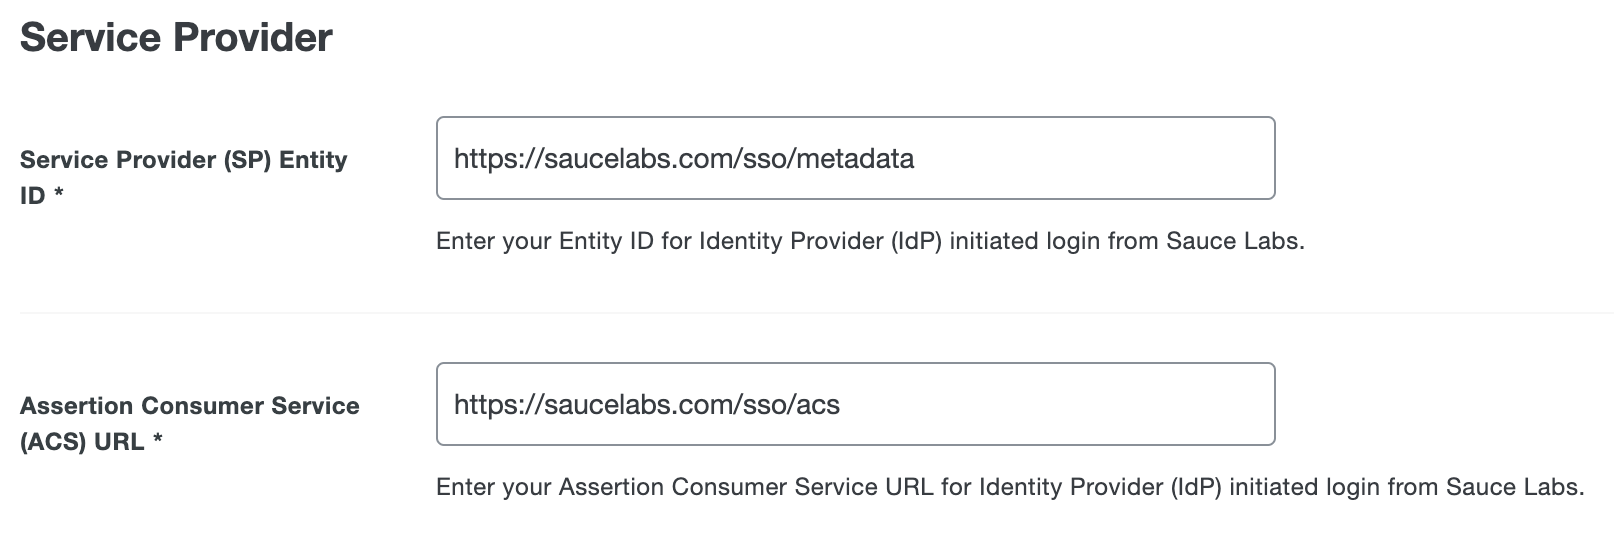 Duo Sauce Labs Entity ID and ACS URL